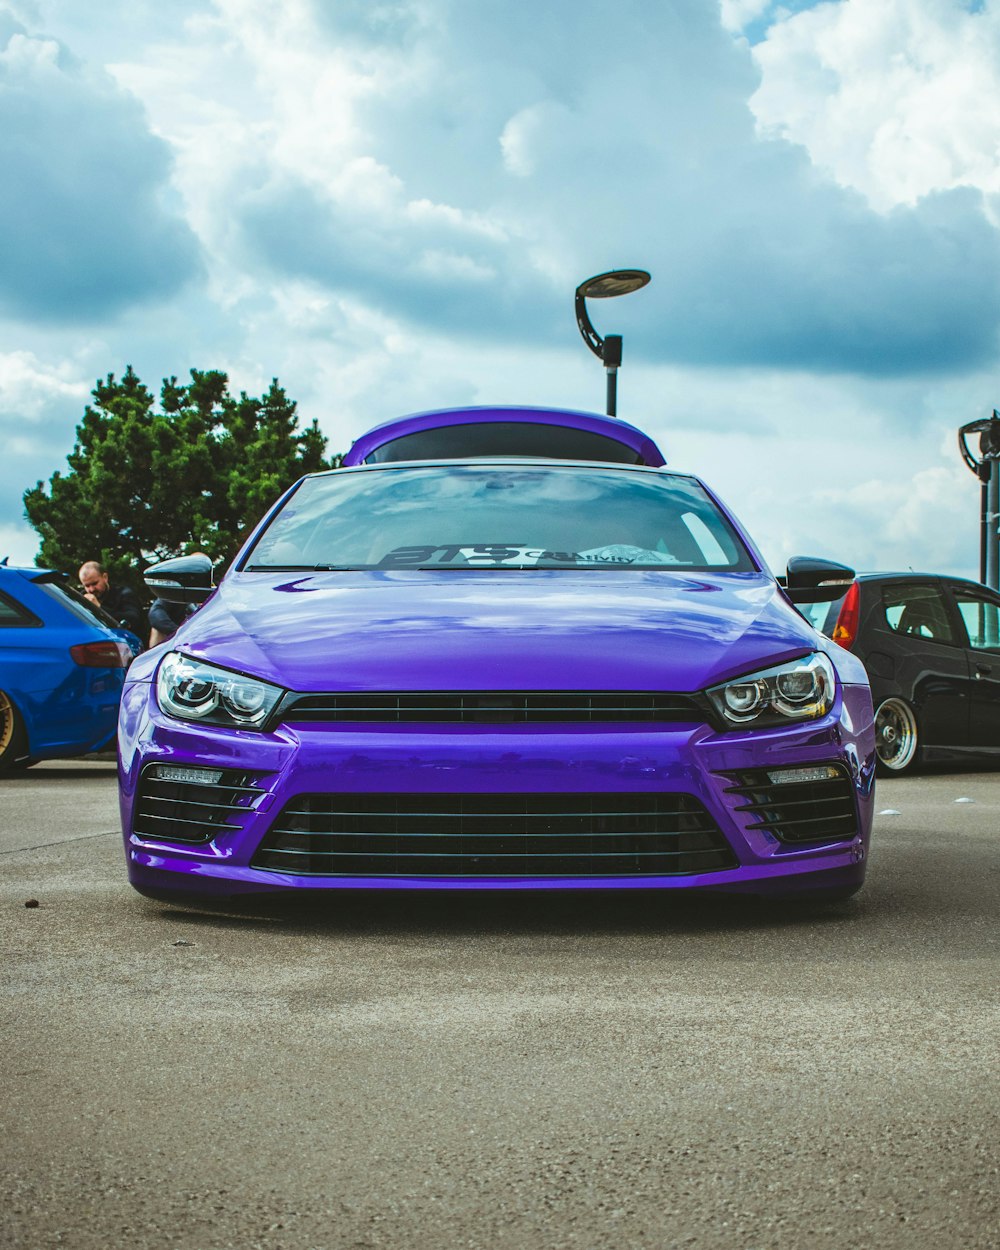 a purple car parked in a parking lot